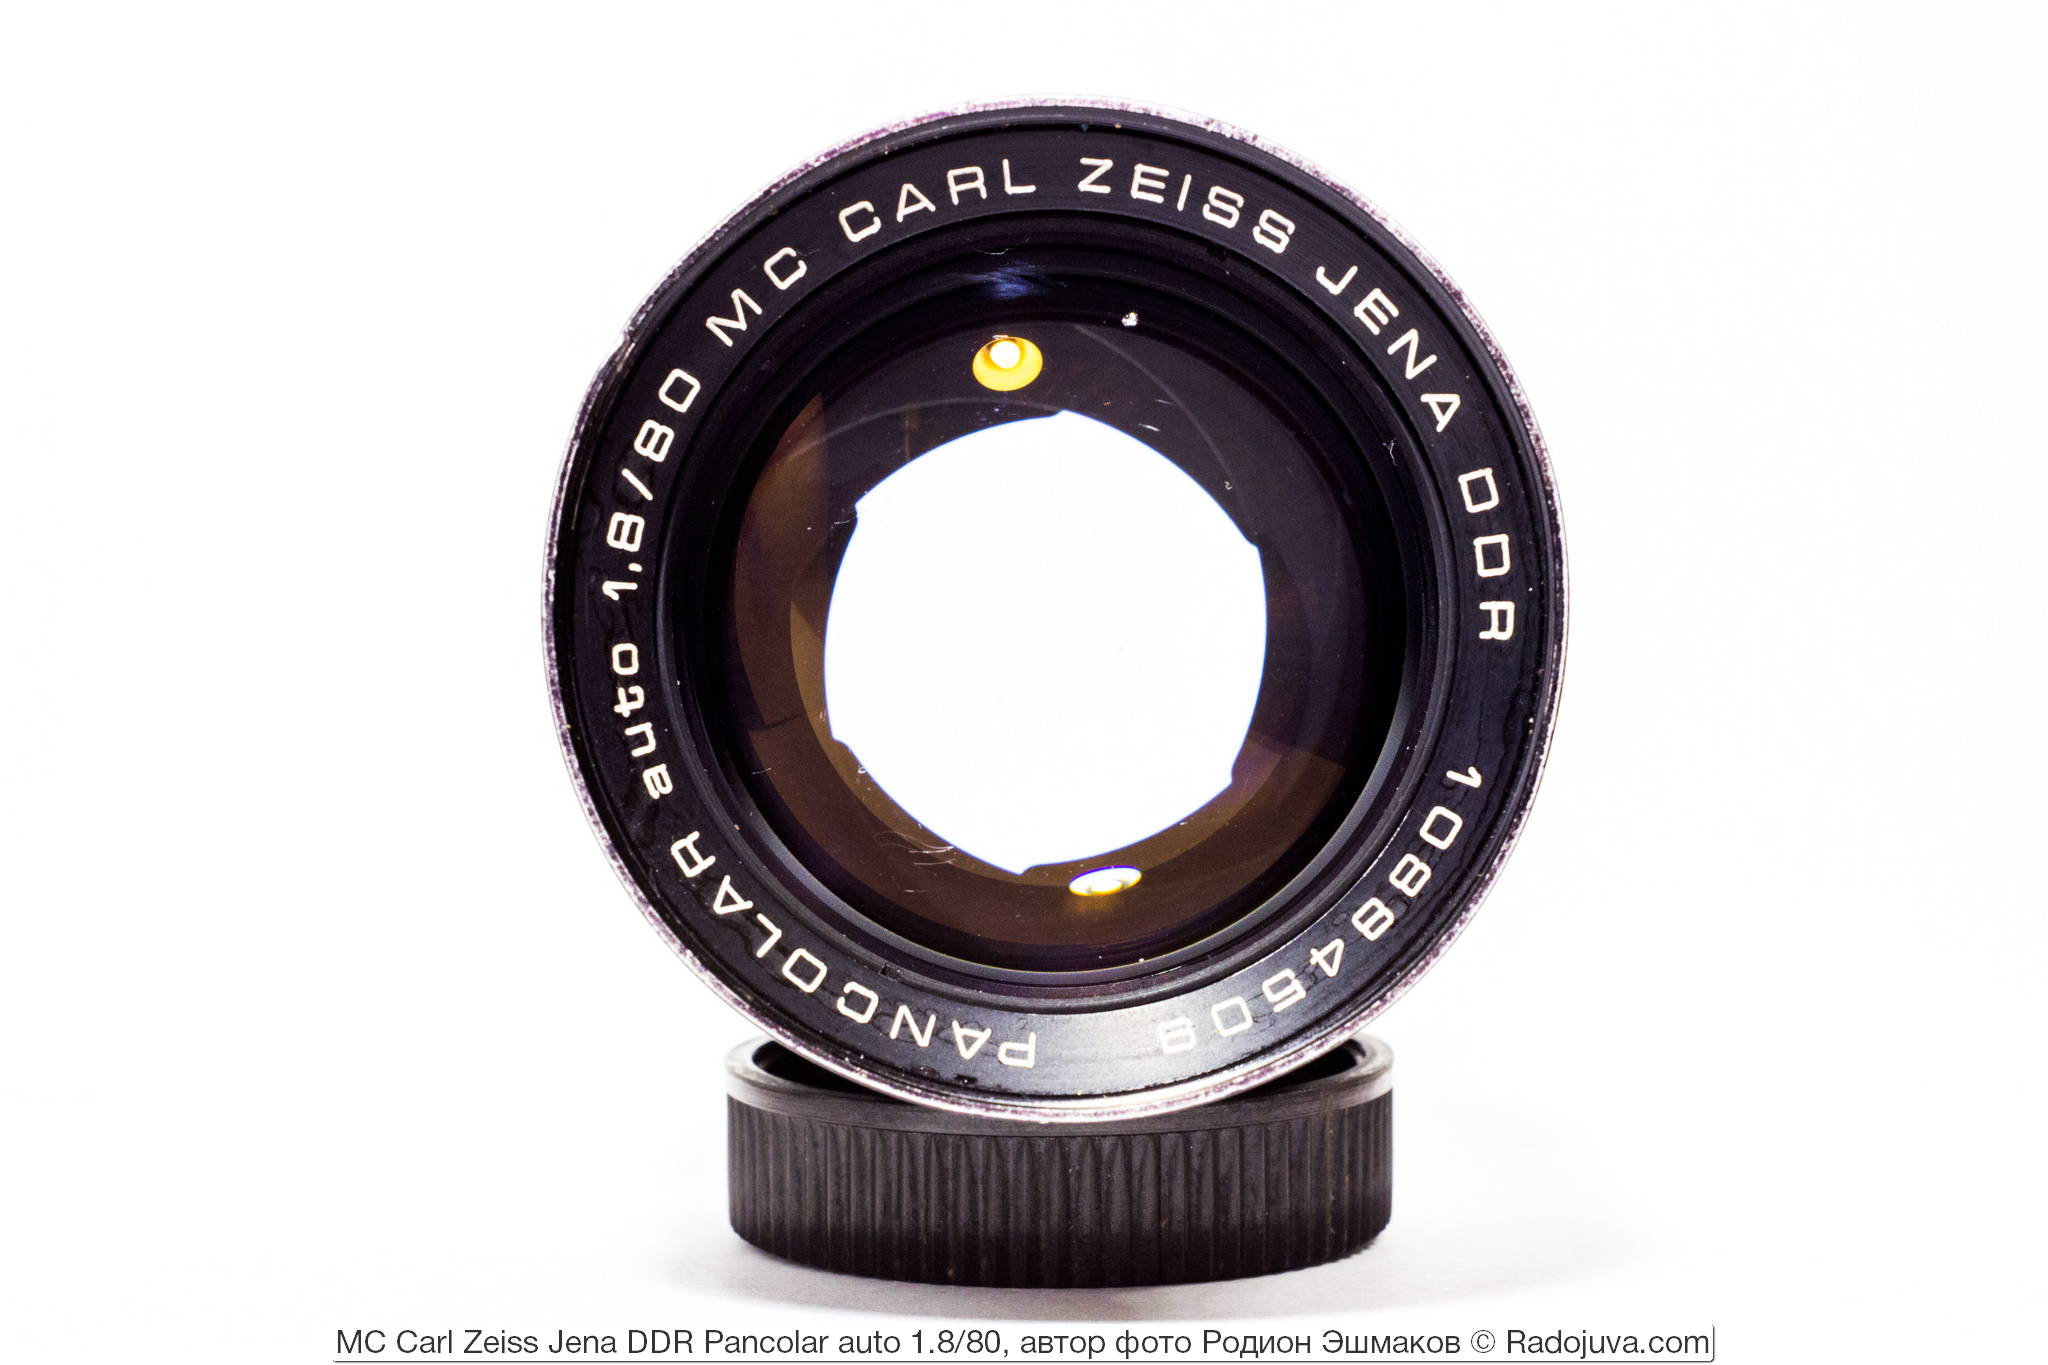 MC Carl Zeiss Jena DDR Pancolar auto 1.8 / 80. Review from the 